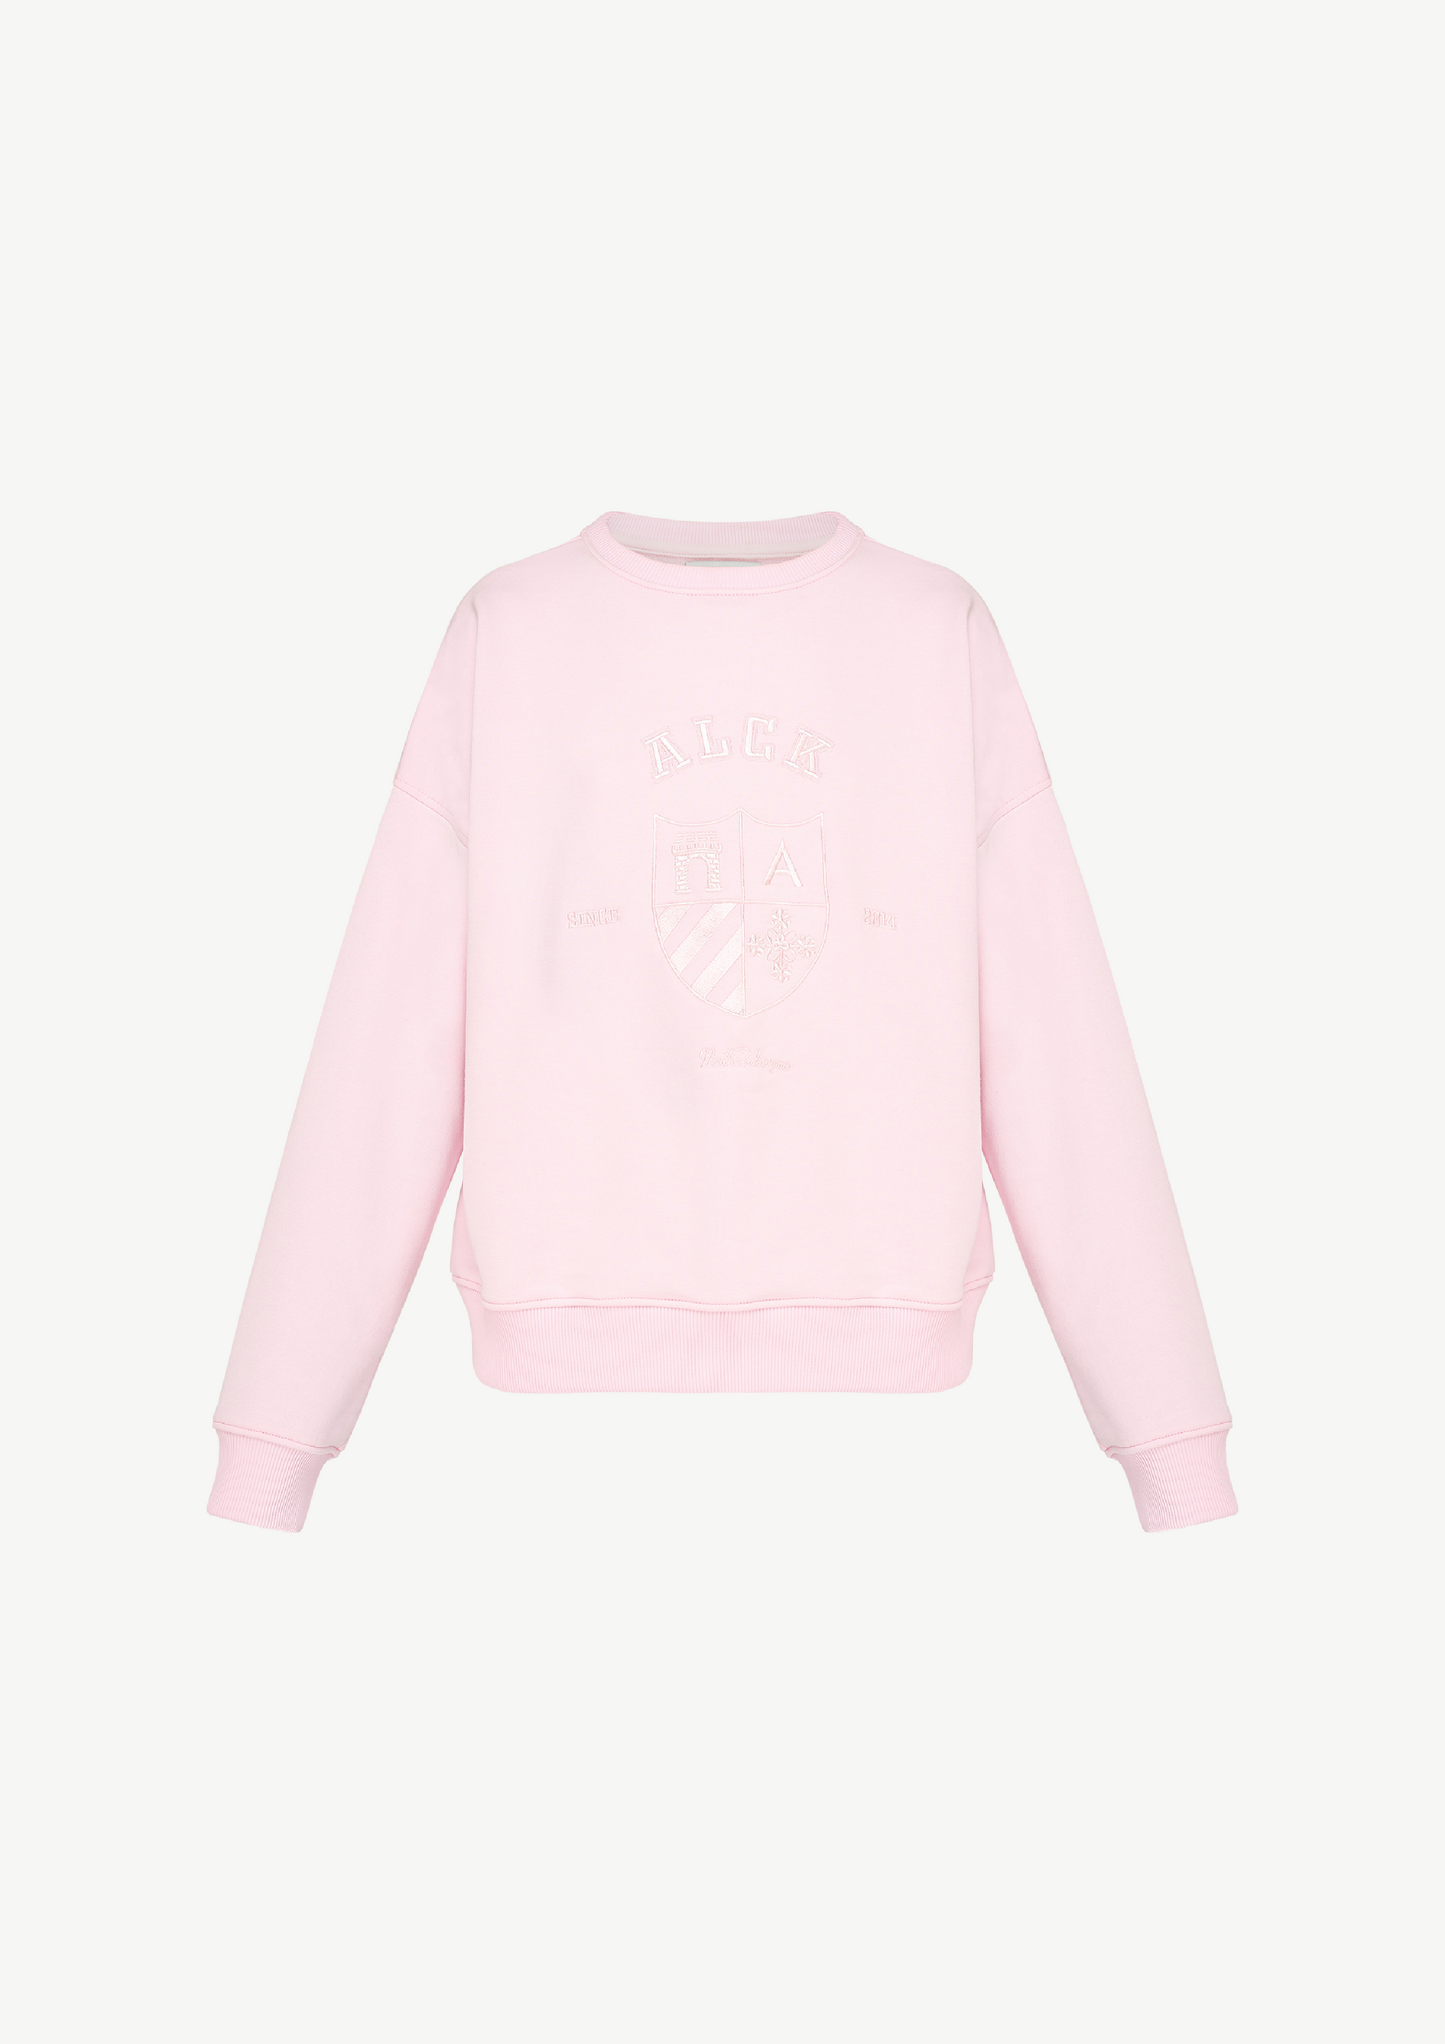 Sweatshirt With Emblem Embroidery In Pink